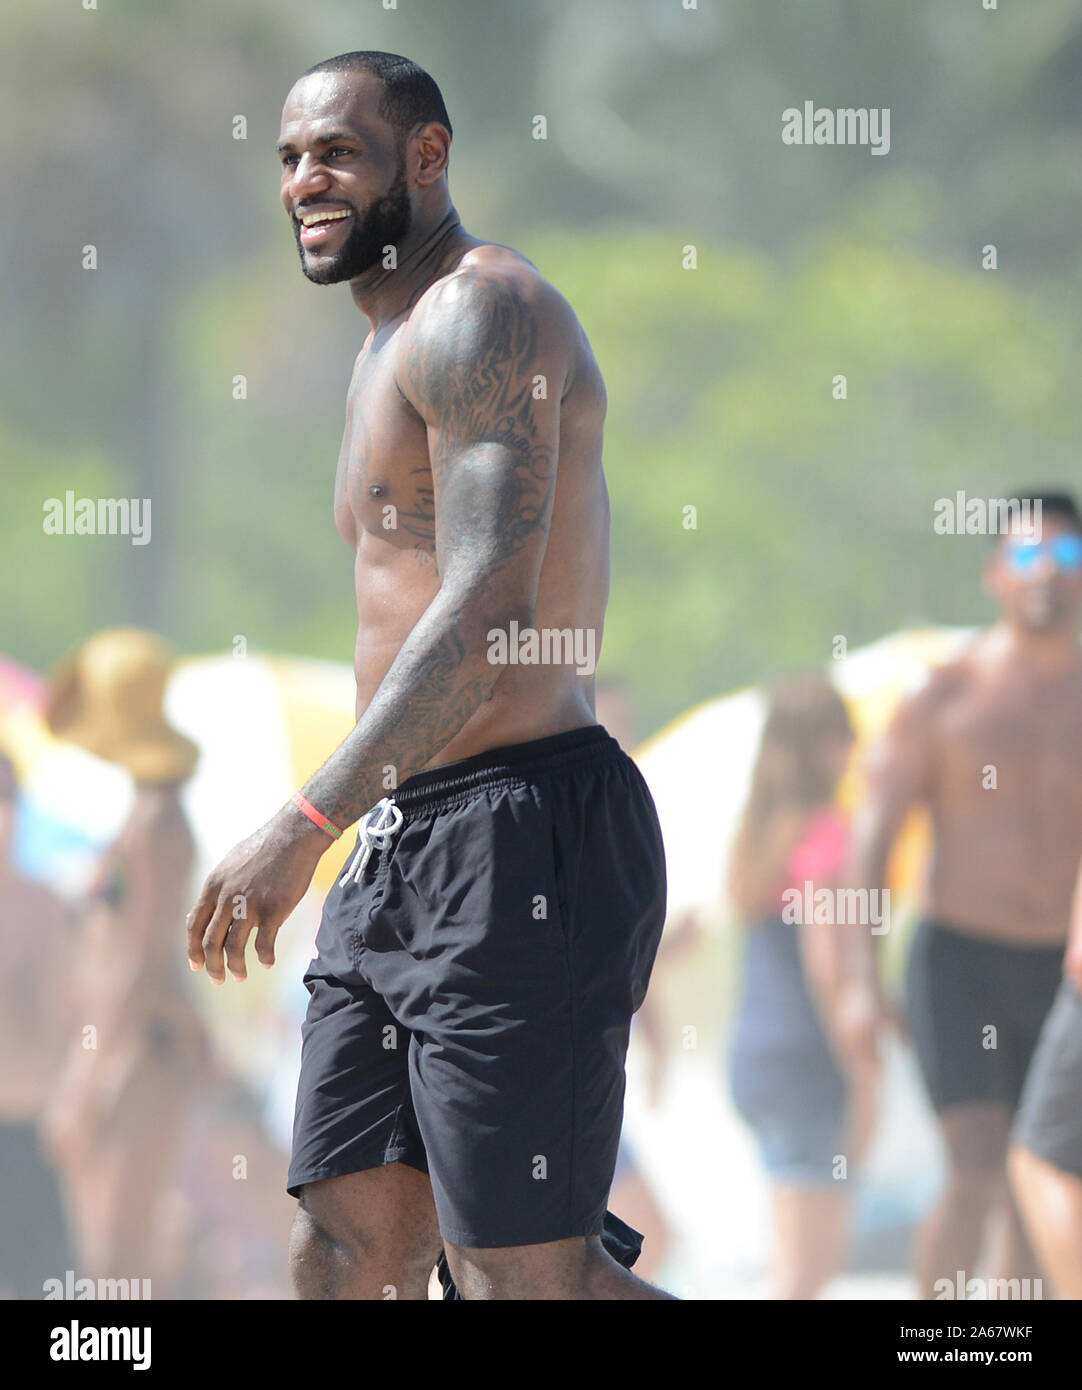 MIAMI BEACH, FL - AUGUST LeBron James showed on location in Miami Beach for a Nike commercial. The NBA champion hopped on bicycle and rode around the Ocean